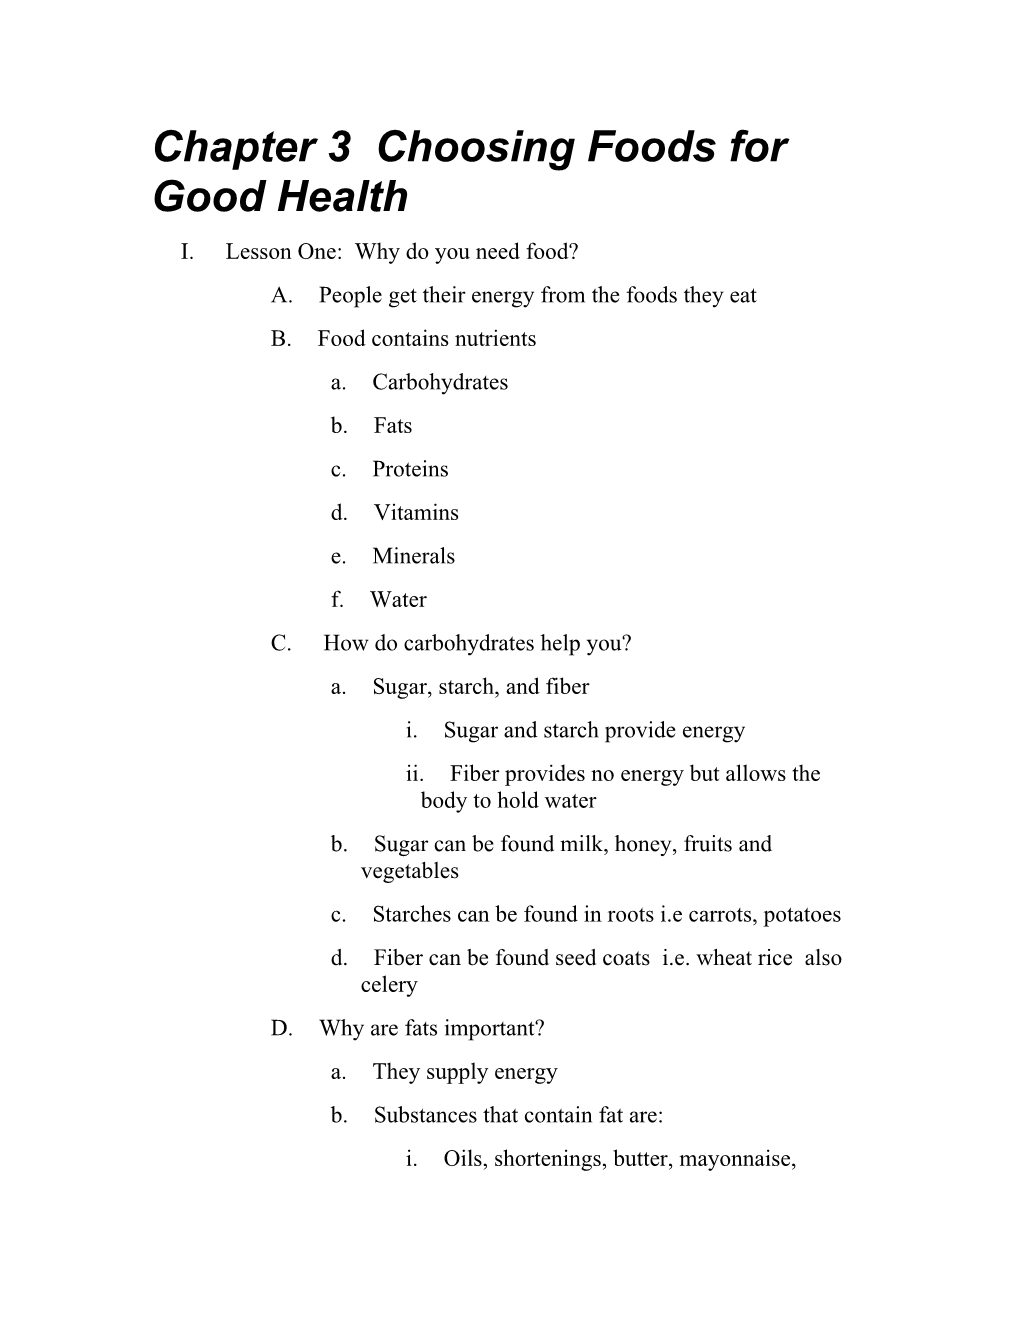 Chapter 3 Choosing Foods for Good Health